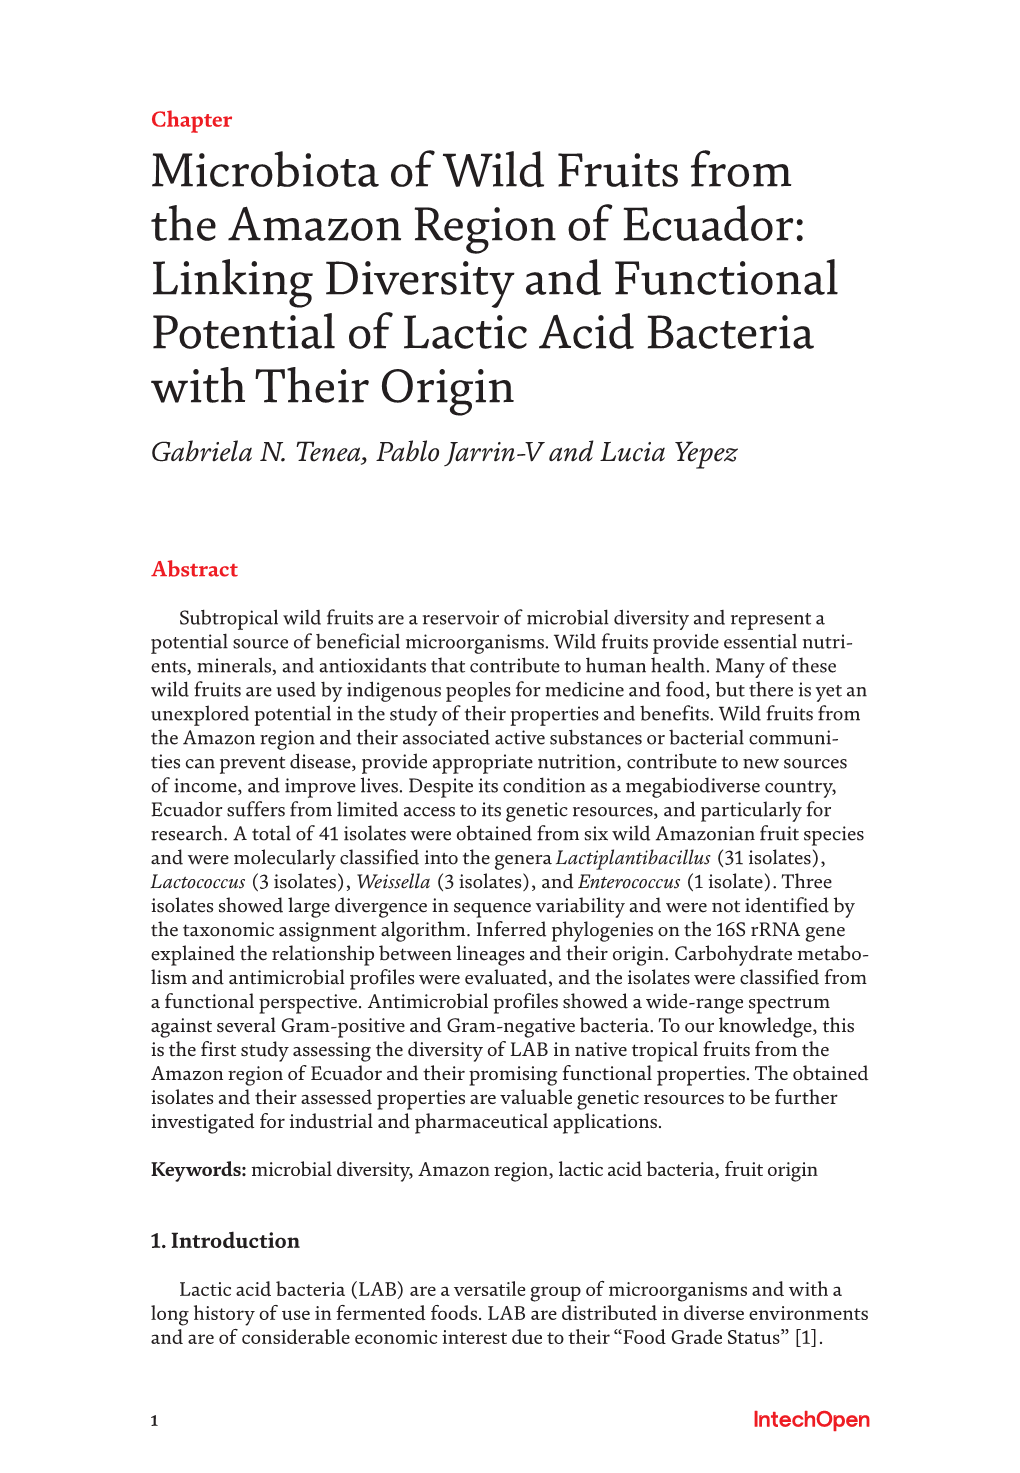 Linking Diversity and Functional Potential of Lactic Acid Bacteria with Their Origin Gabriela N